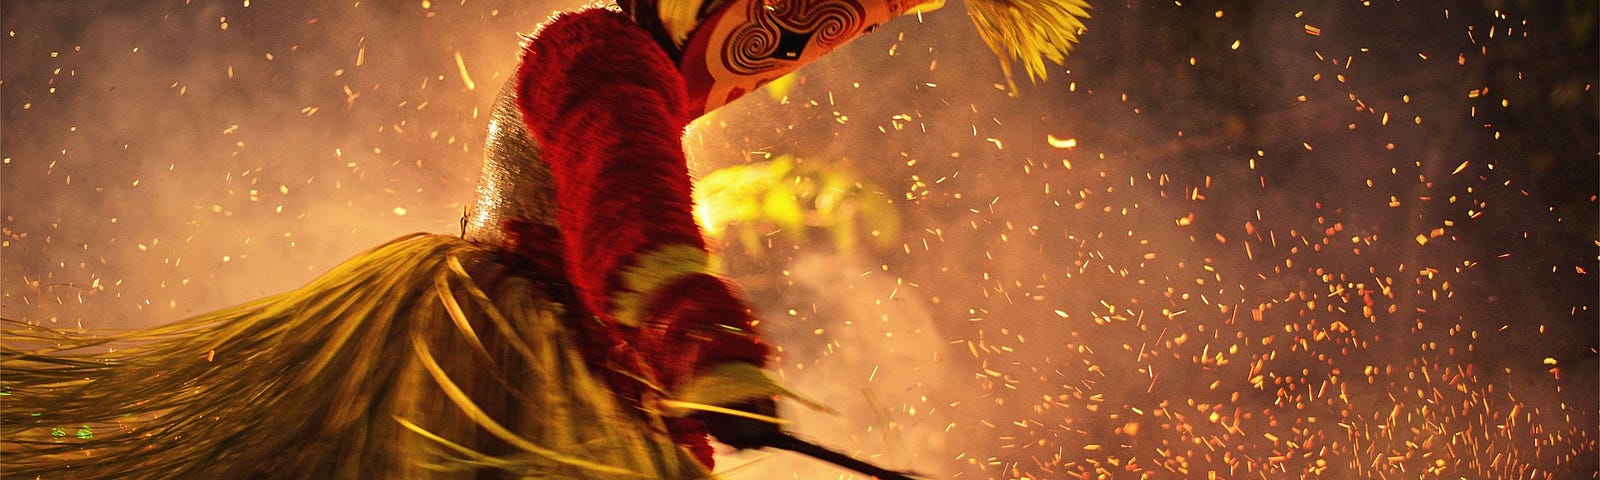 Indian fire dancer costumed in red with mask and swirling sparks.